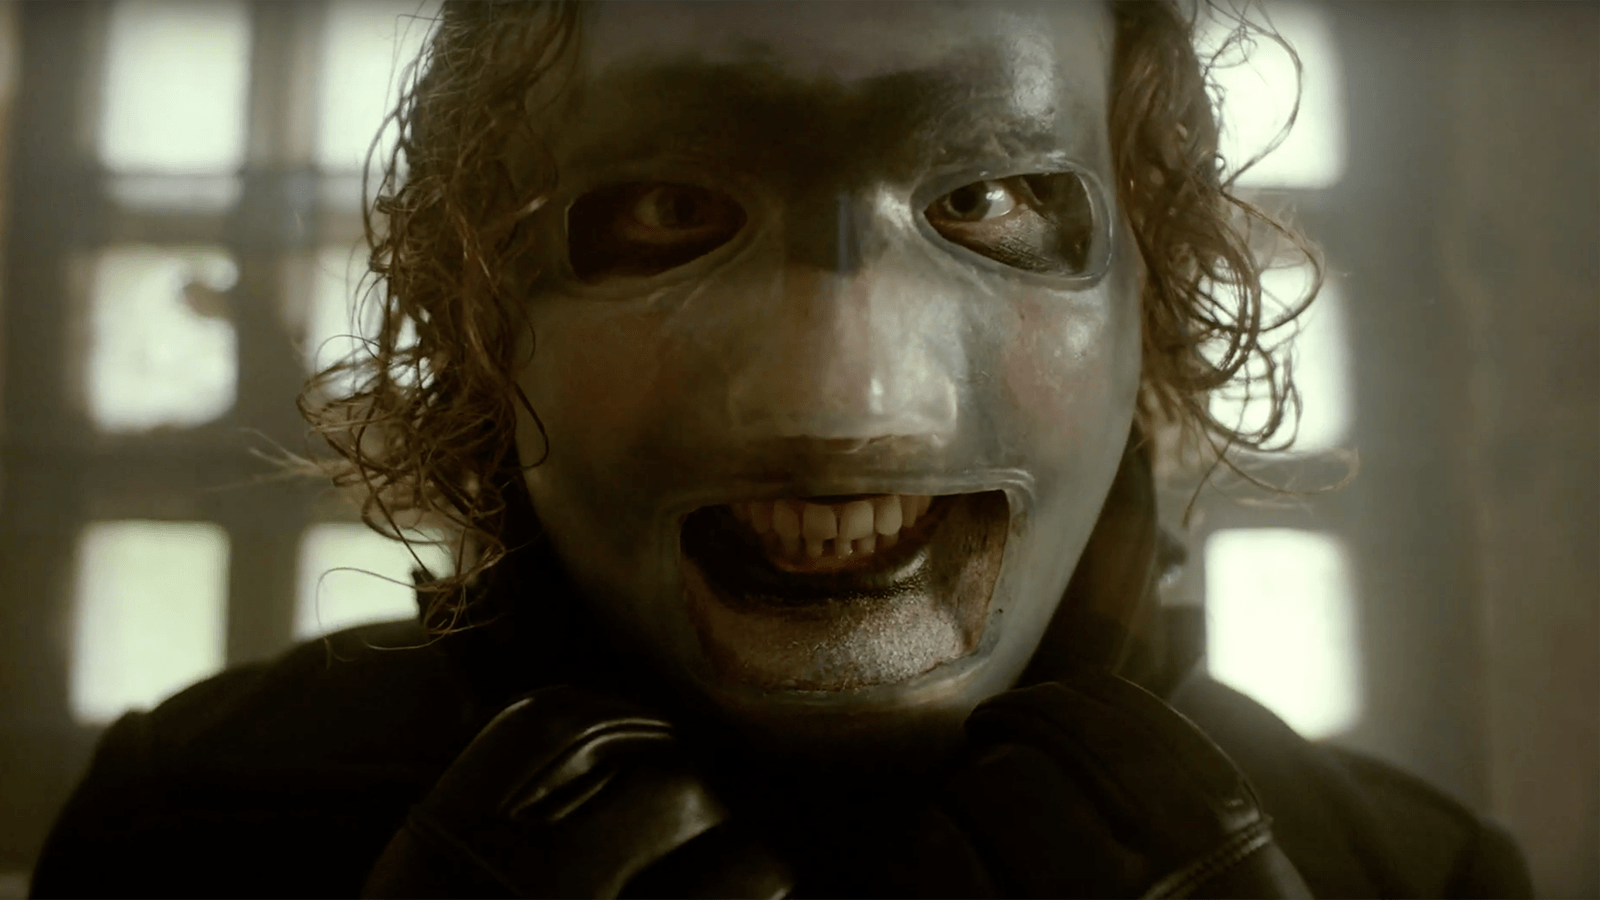 See Slipknot Reveal New Masks in Eerie Video for New Song Unsainted